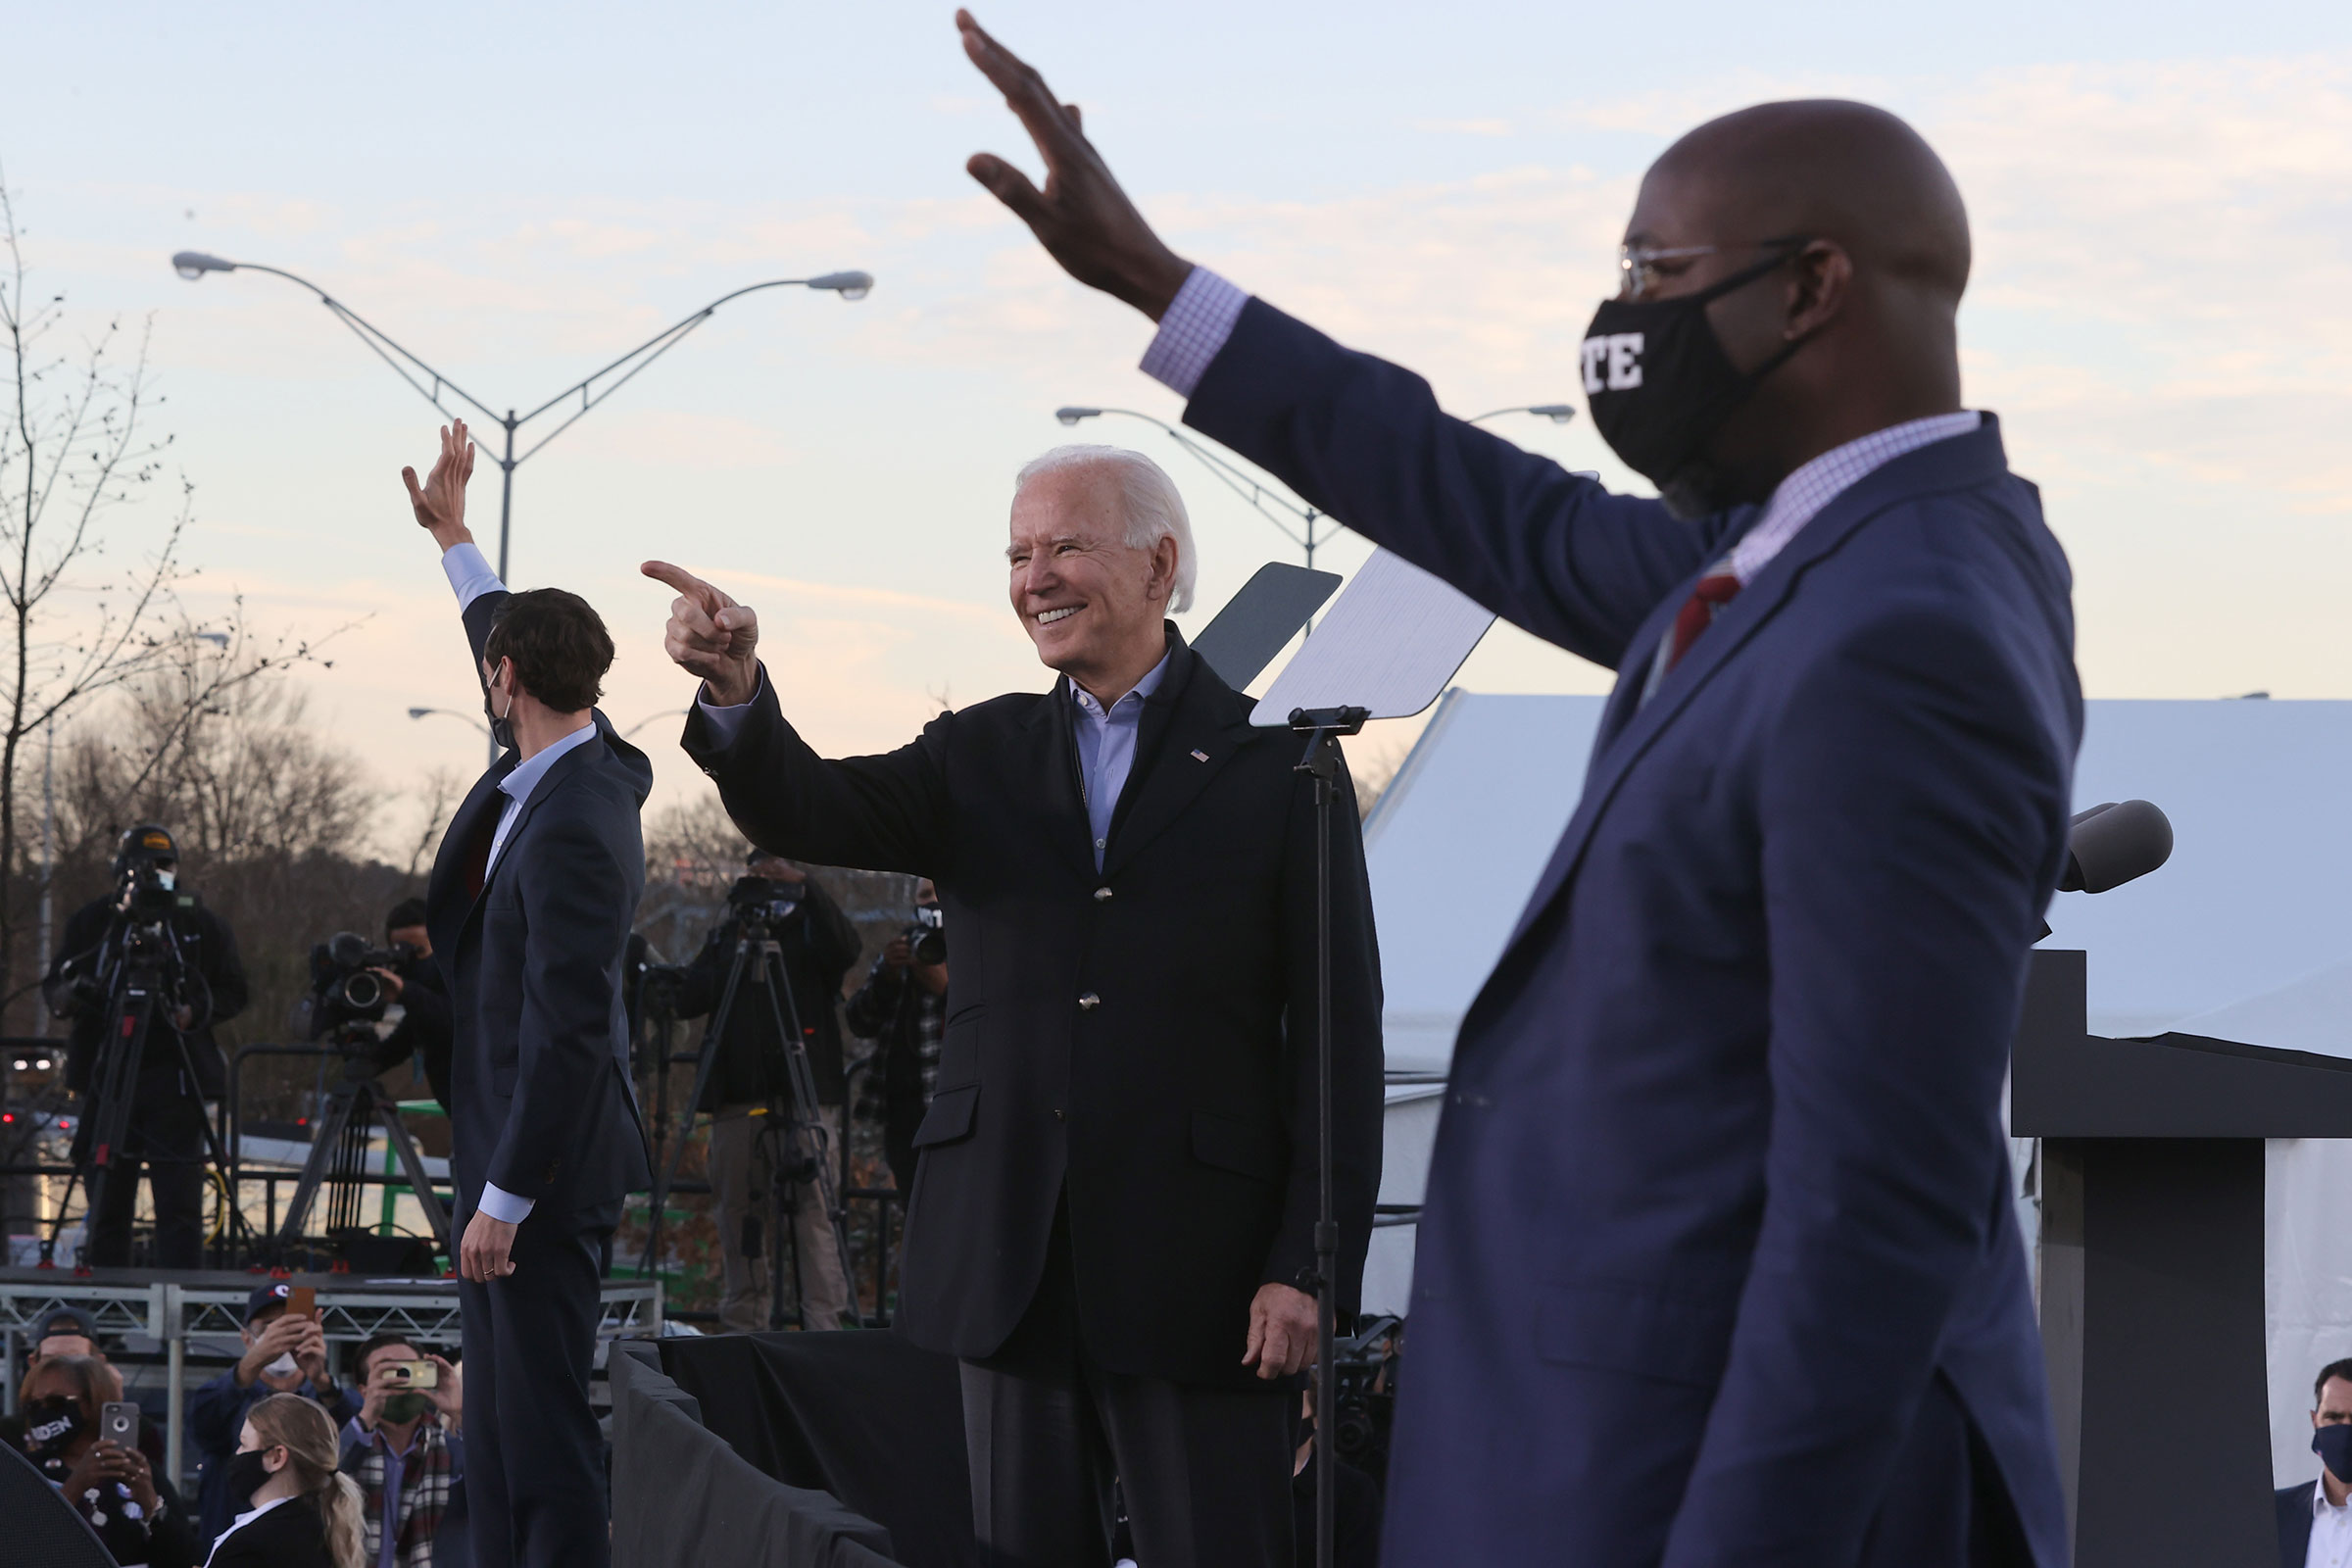 President-elect Joe Biden along with democratic candidates for the Senate Jon Ossoff and Rev. Raphael Warnock greet supporters during a campaign rally the day before their runoff election in Atlanta, on Jan. 04, 2021. (Chip Somodevilla—Getty Images)